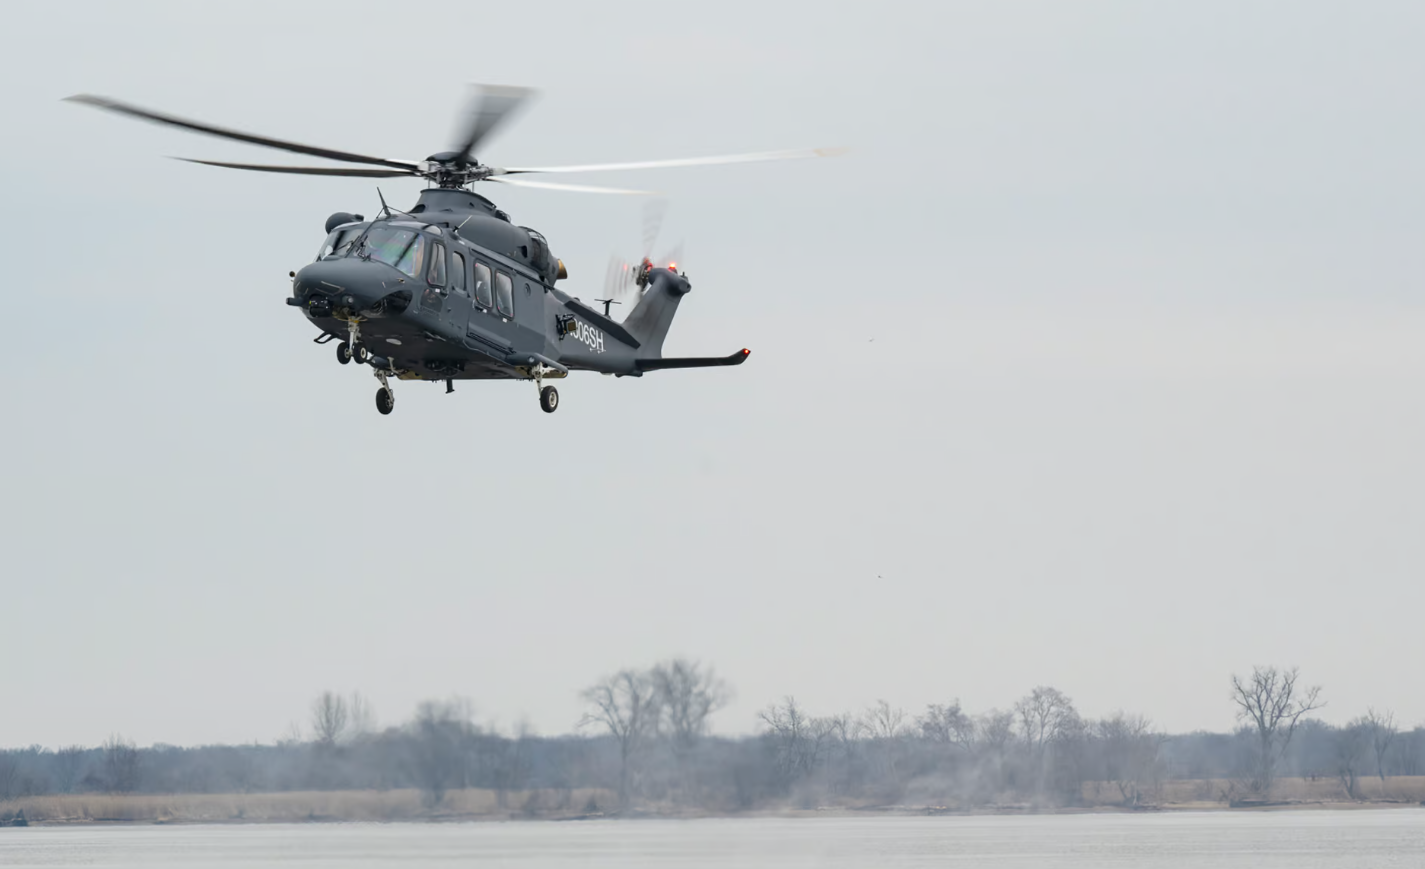 MH-139A Gray Wolf helicopters will protect US nuclear mines